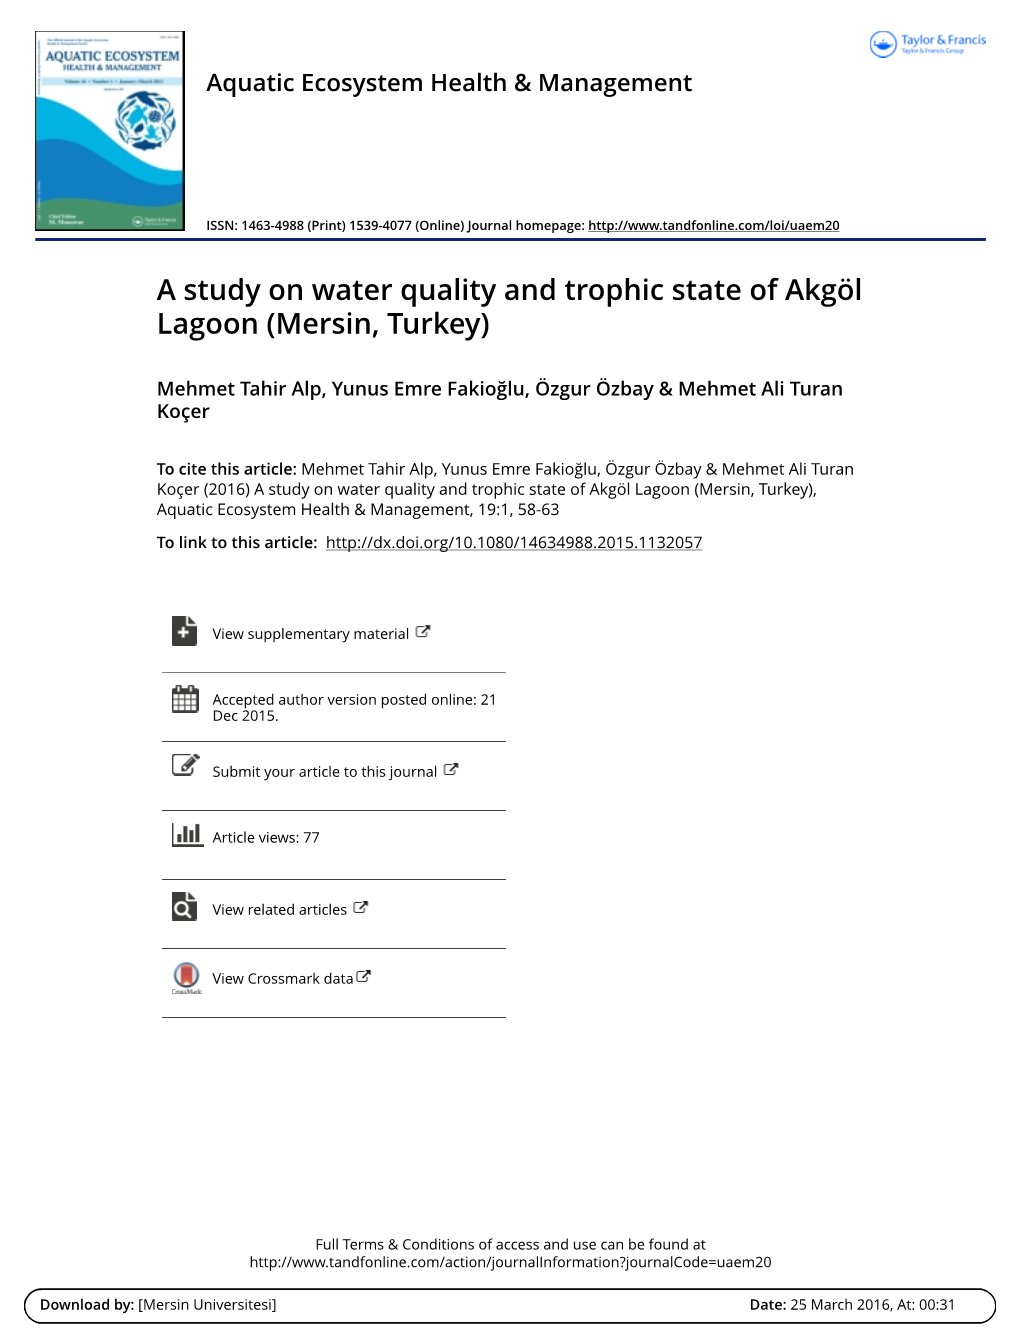 A Study on Water Quality and Trophic State of Akgöl Lagoon (Mersin, Turkey)